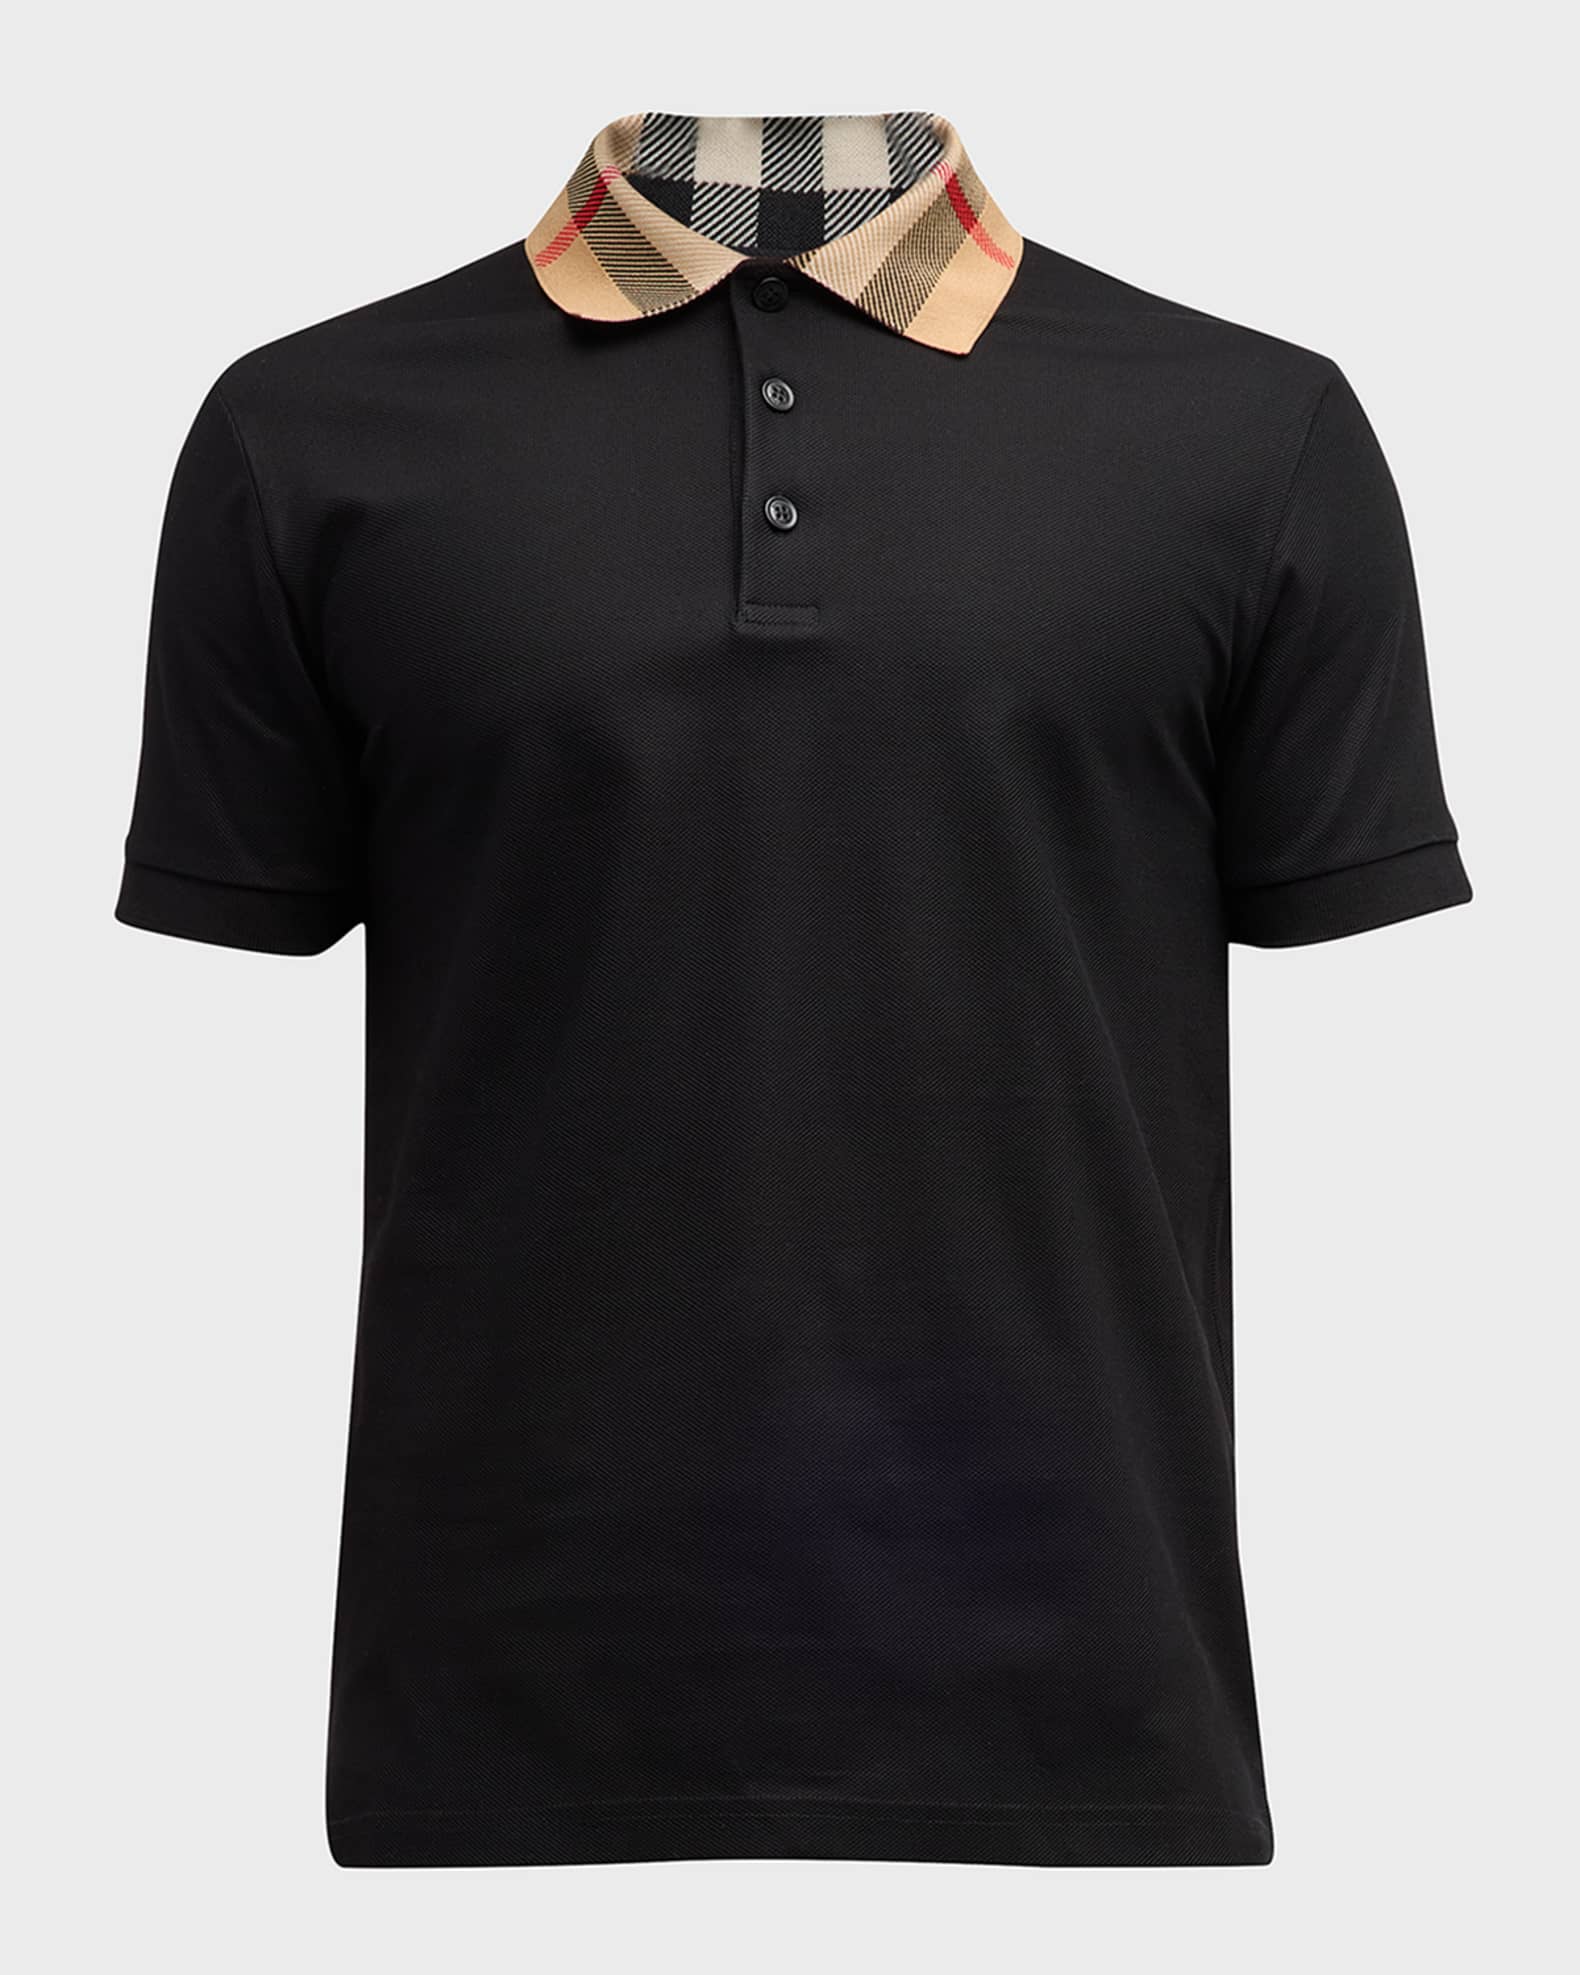 Cotton And Silk Polo Shirt in Beige - Burberry